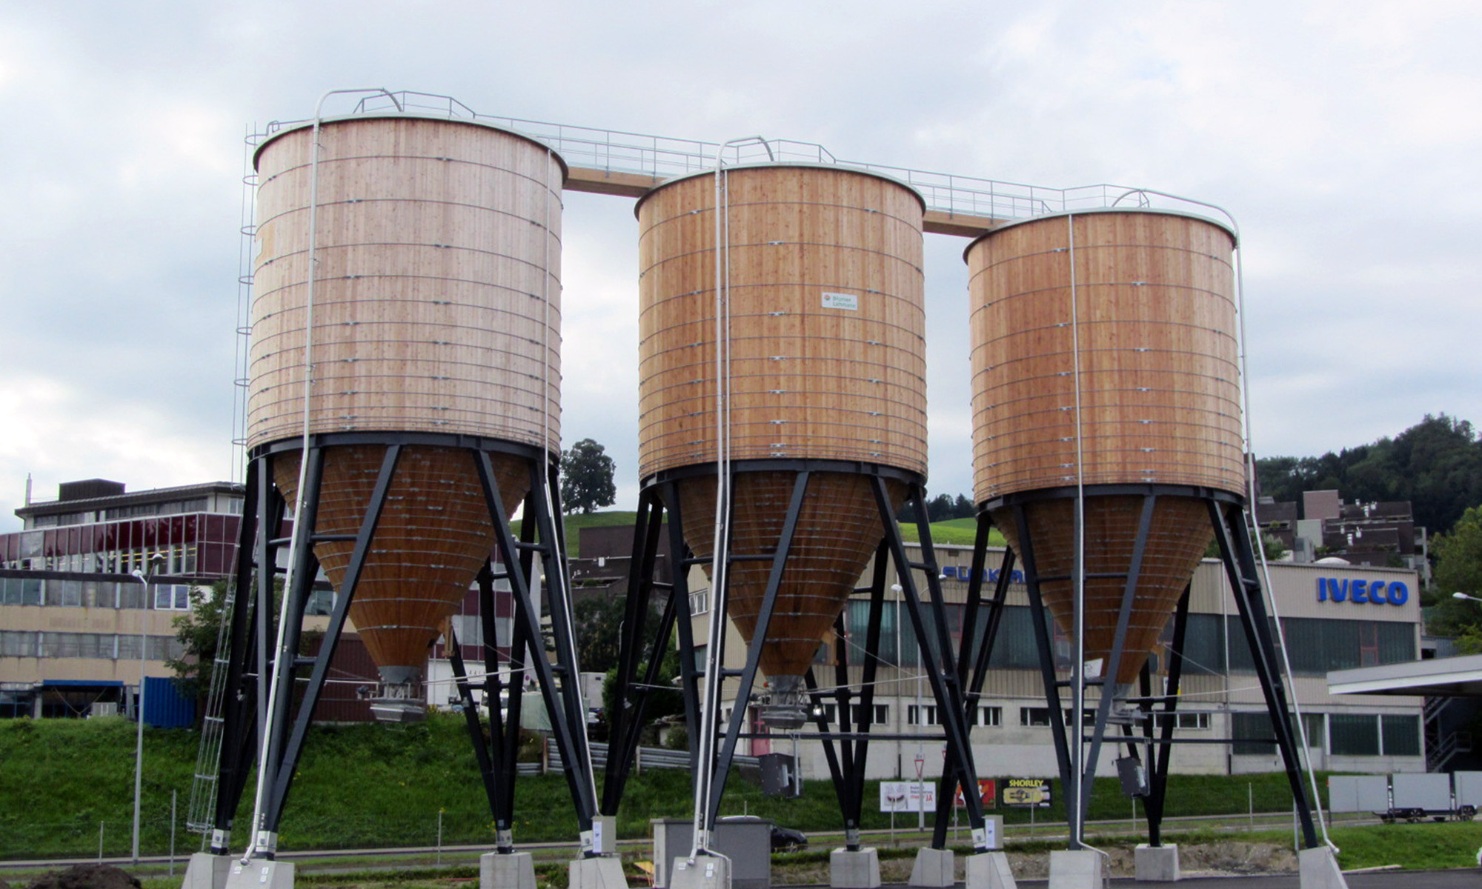 Three round timber silos in a line, connected by a roof crossover, St Gallen Neudorf